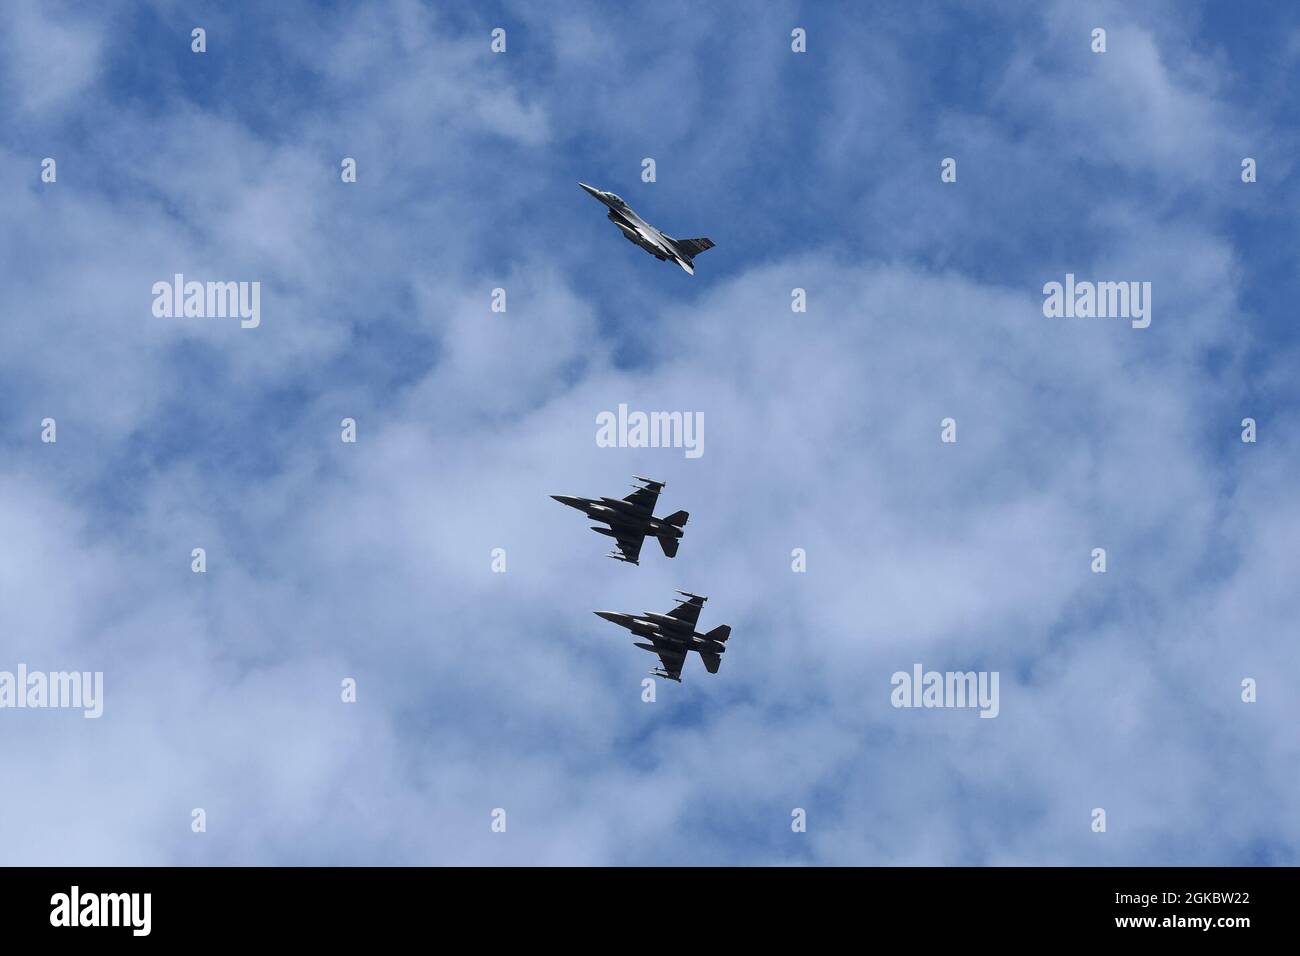 U.S. Air Force F-16 Fighting Falcon fighter jets assigned to the South Carolina Air National Guard's 169th Fighter Wing return to McEntire Joint National Guard Base, South Carolina after completing a training mission, March 6, 2021. Stock Photo